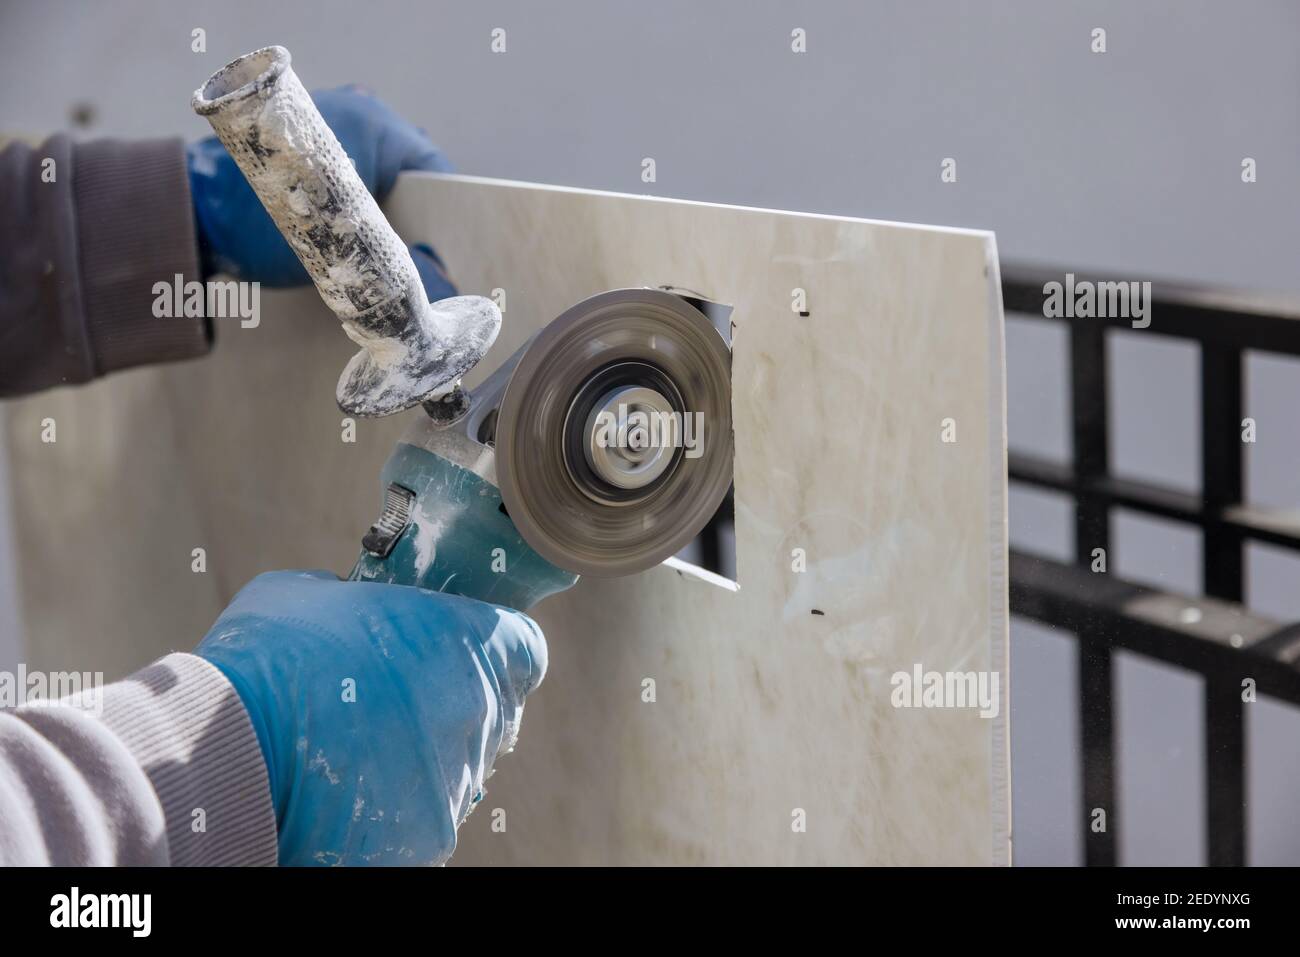 Angle grinder with an cutting ceramic tiles a square opening a hole in the tile Stock Photo